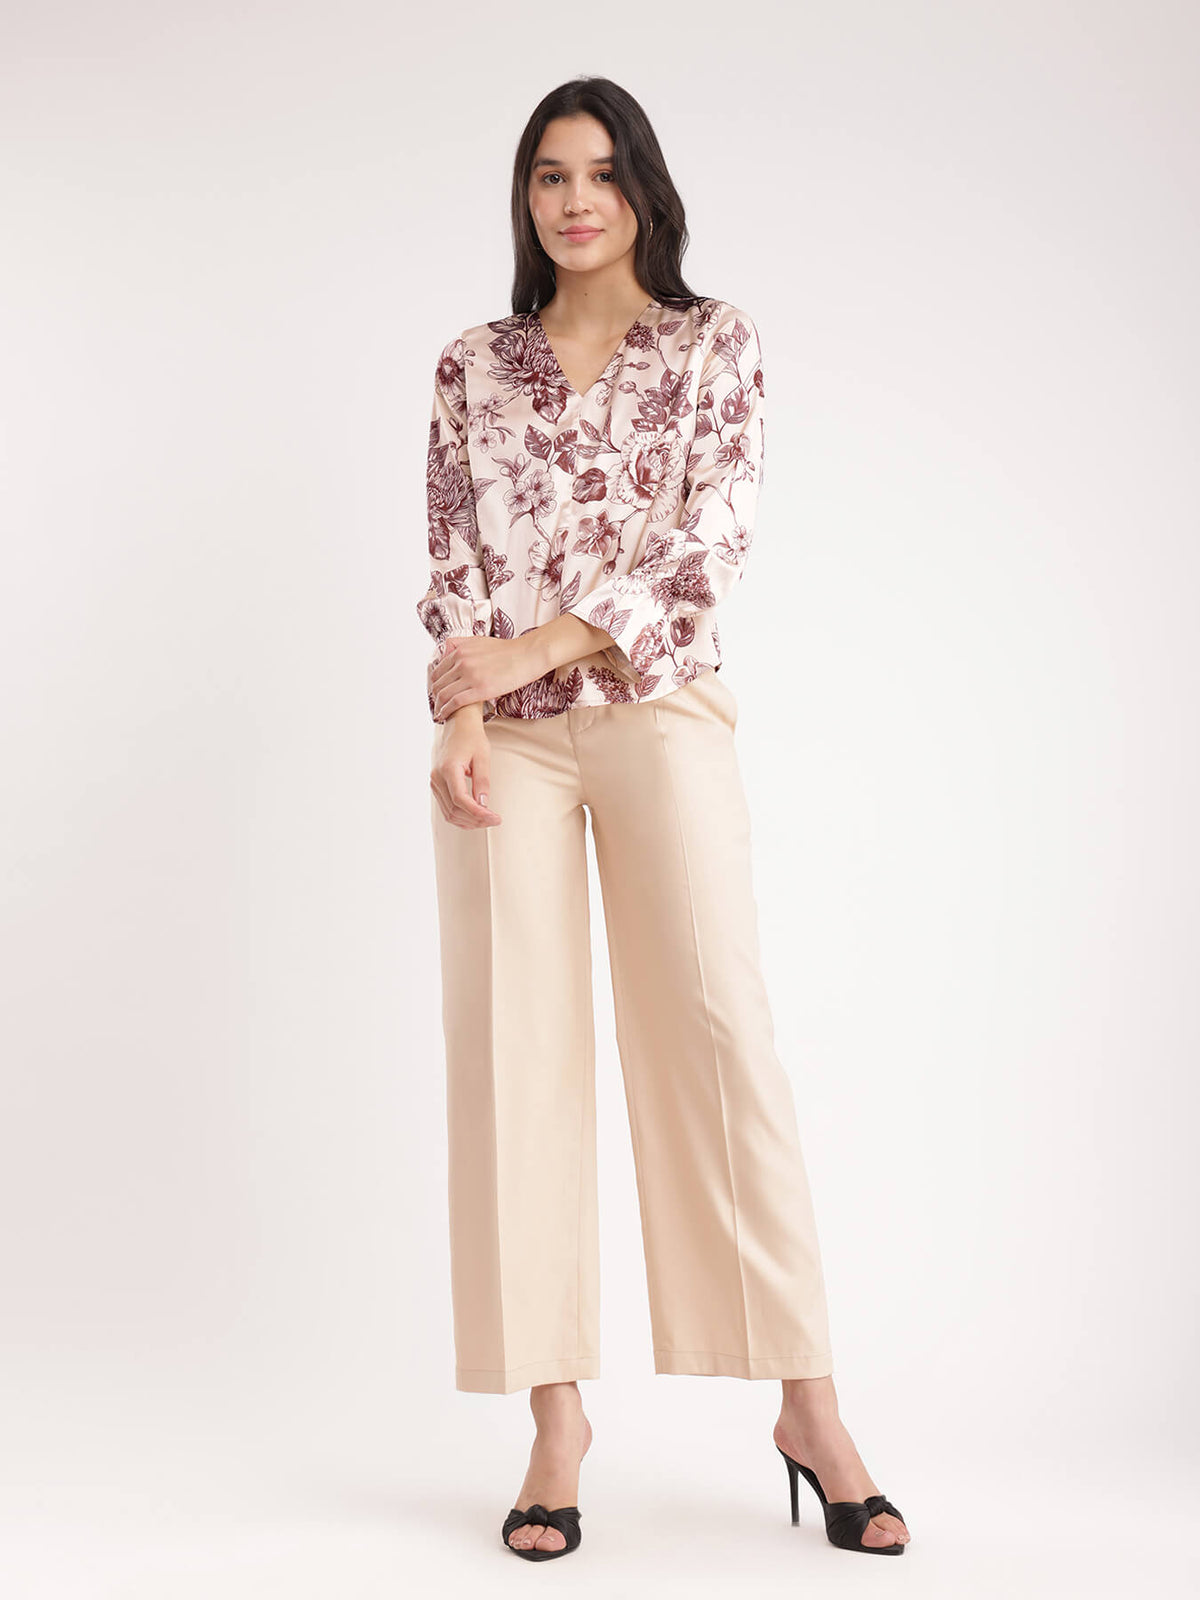 Satin Floral Top - Beige And Brown